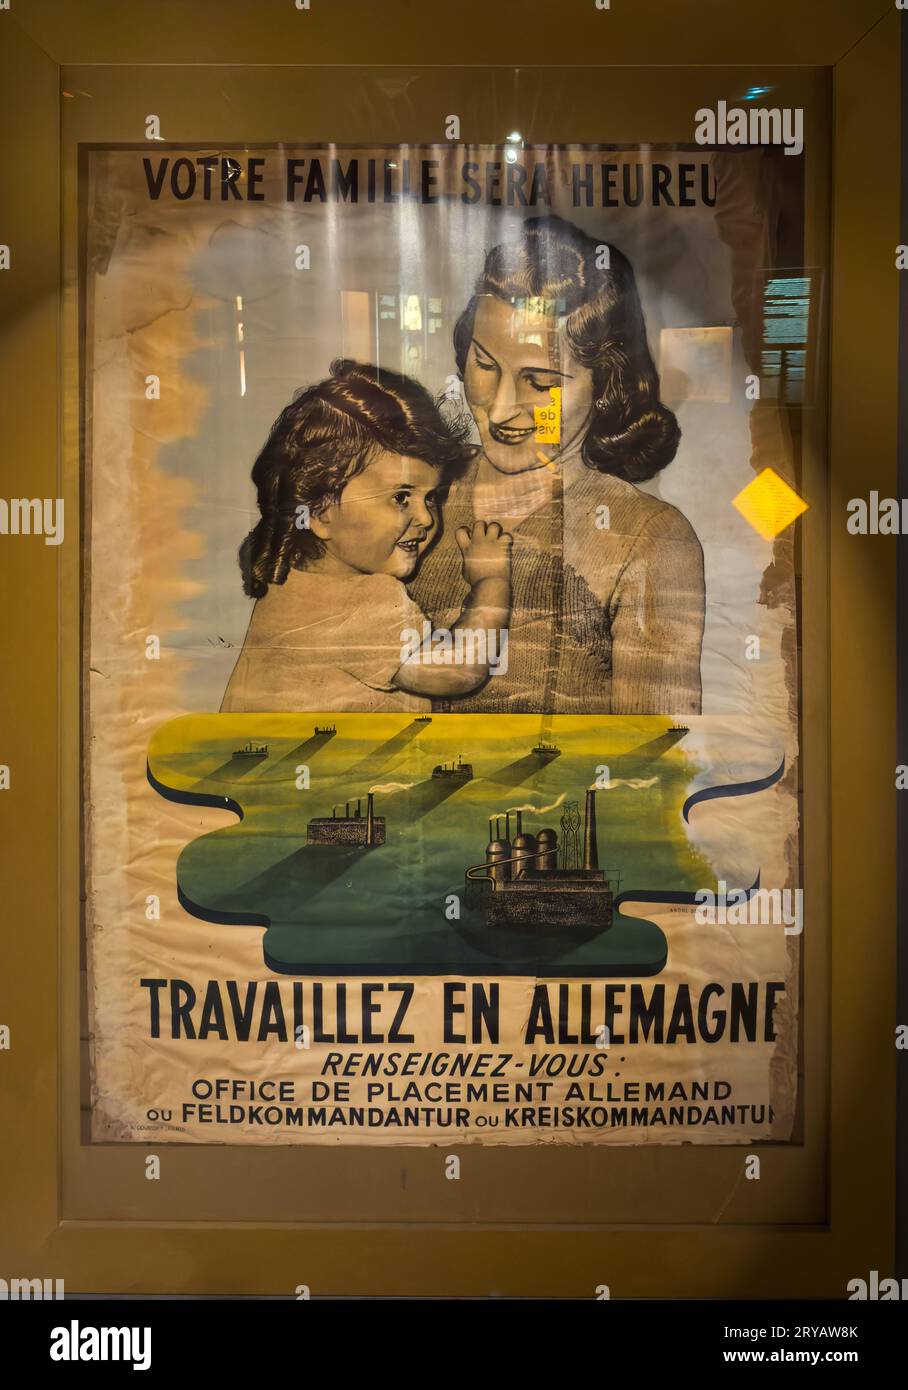 A WW2 German Nazi propaganda poster in the Resistance and Deportation Museum in Grenoble, France,  appealing for people to go and work in factories in Stock Photo